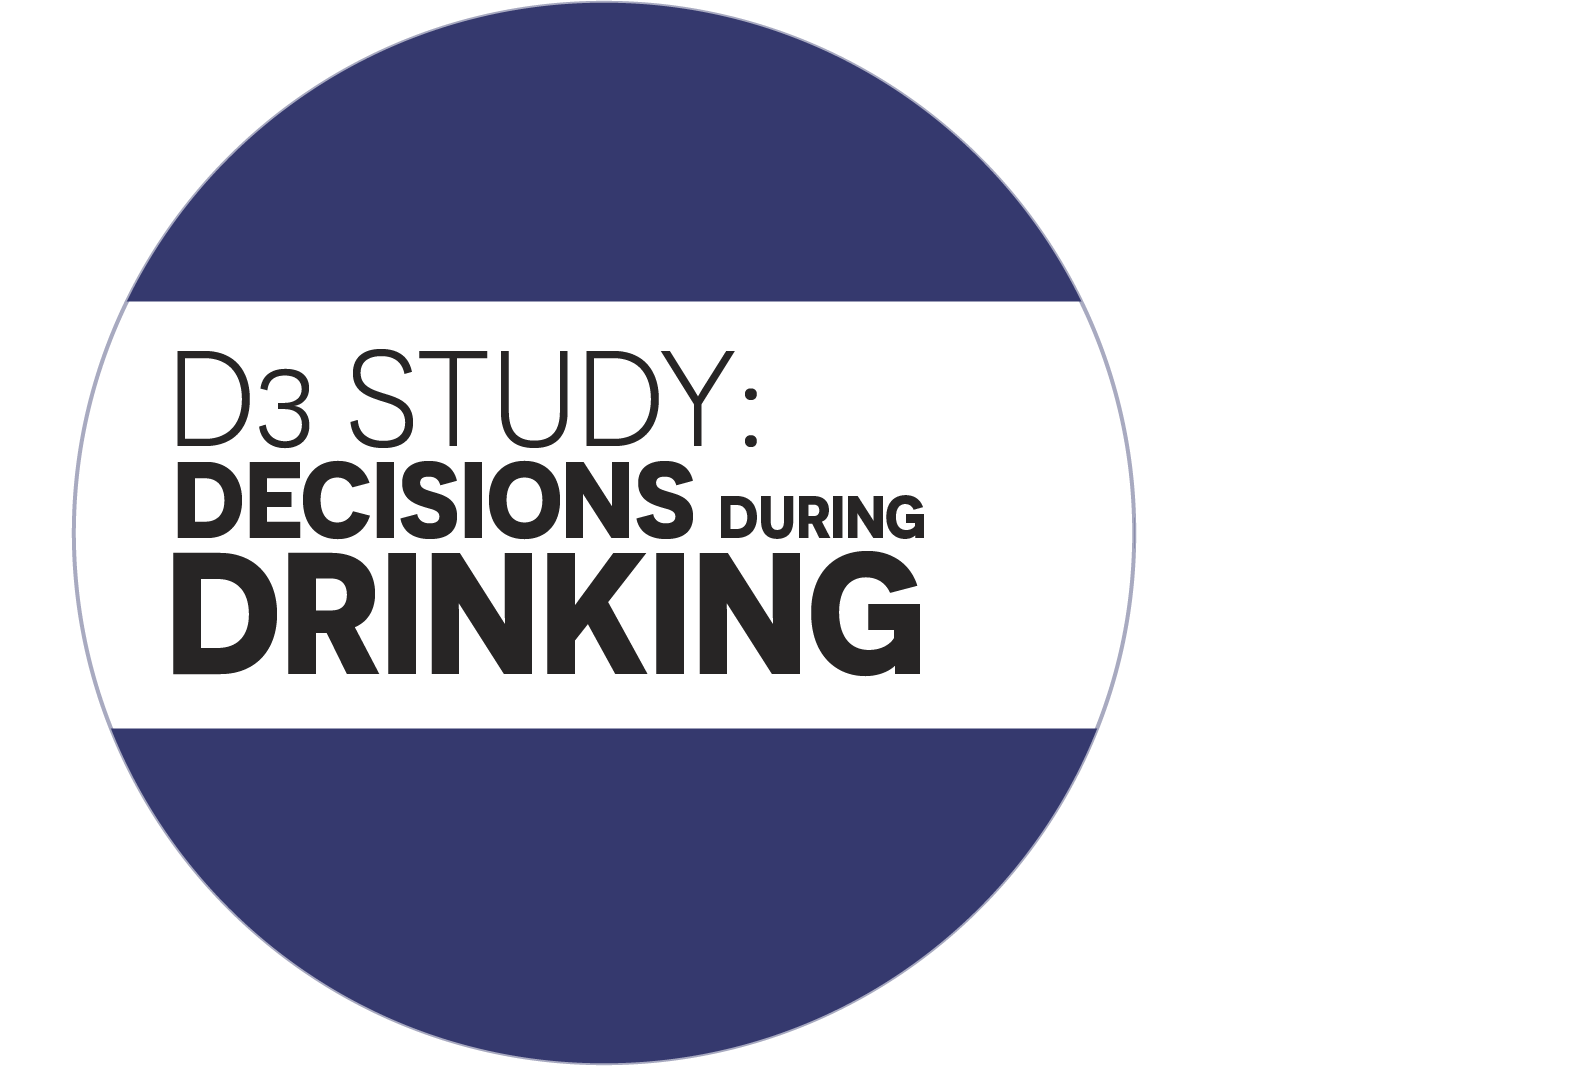 STUDY INFORMATION – D3 Study: Decisions During Drinking